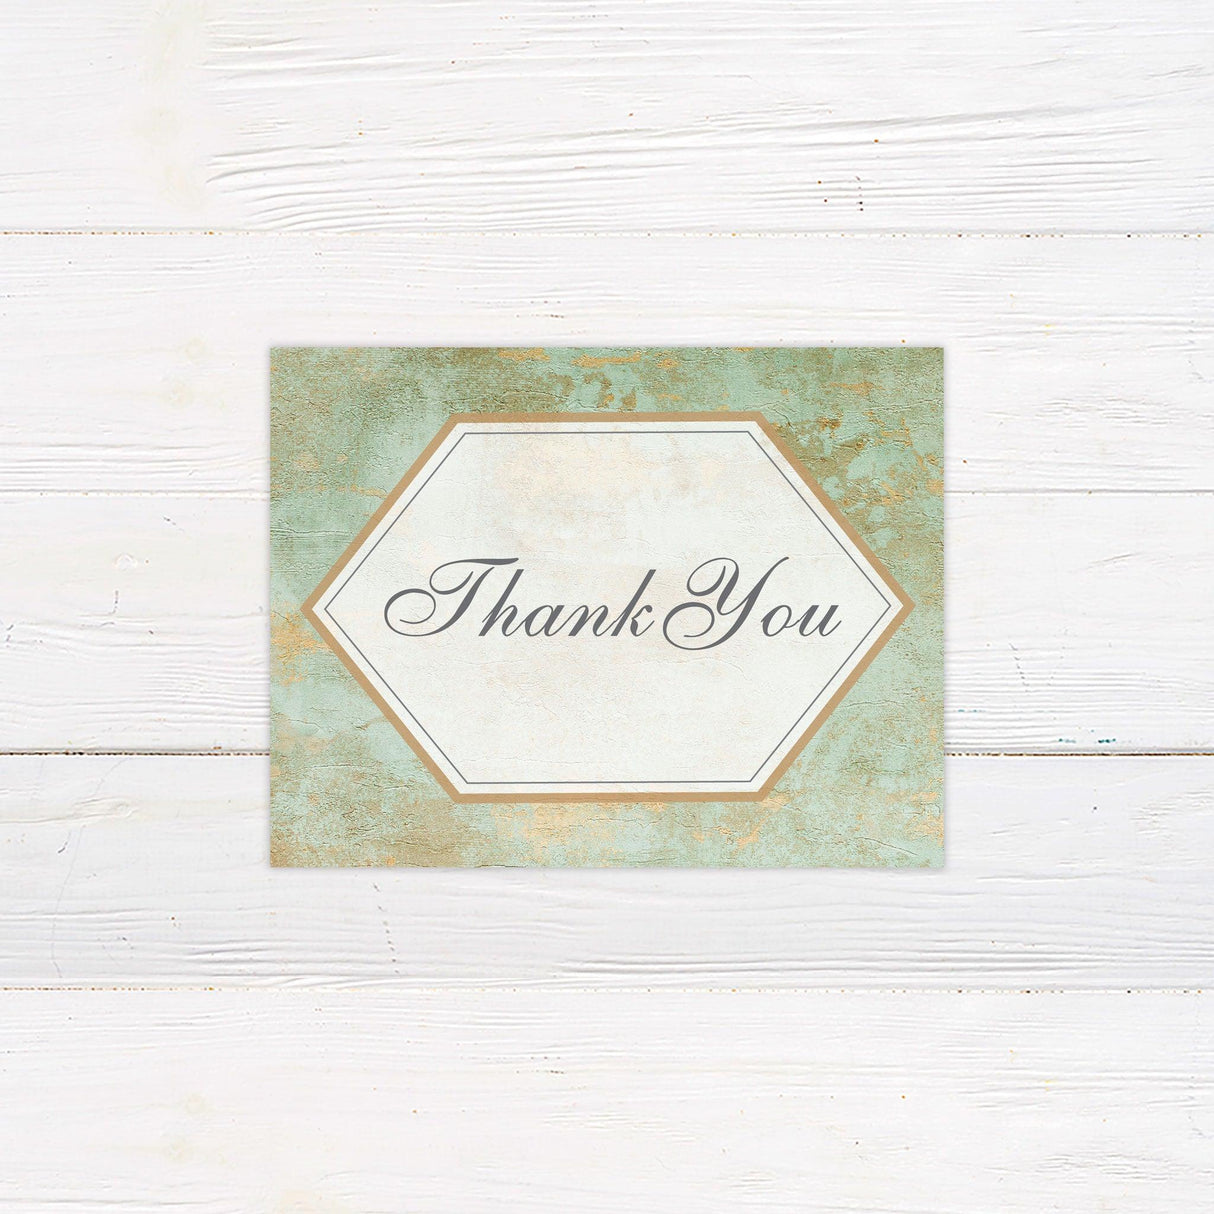 Aged Copper Thank You Card - goprintplus